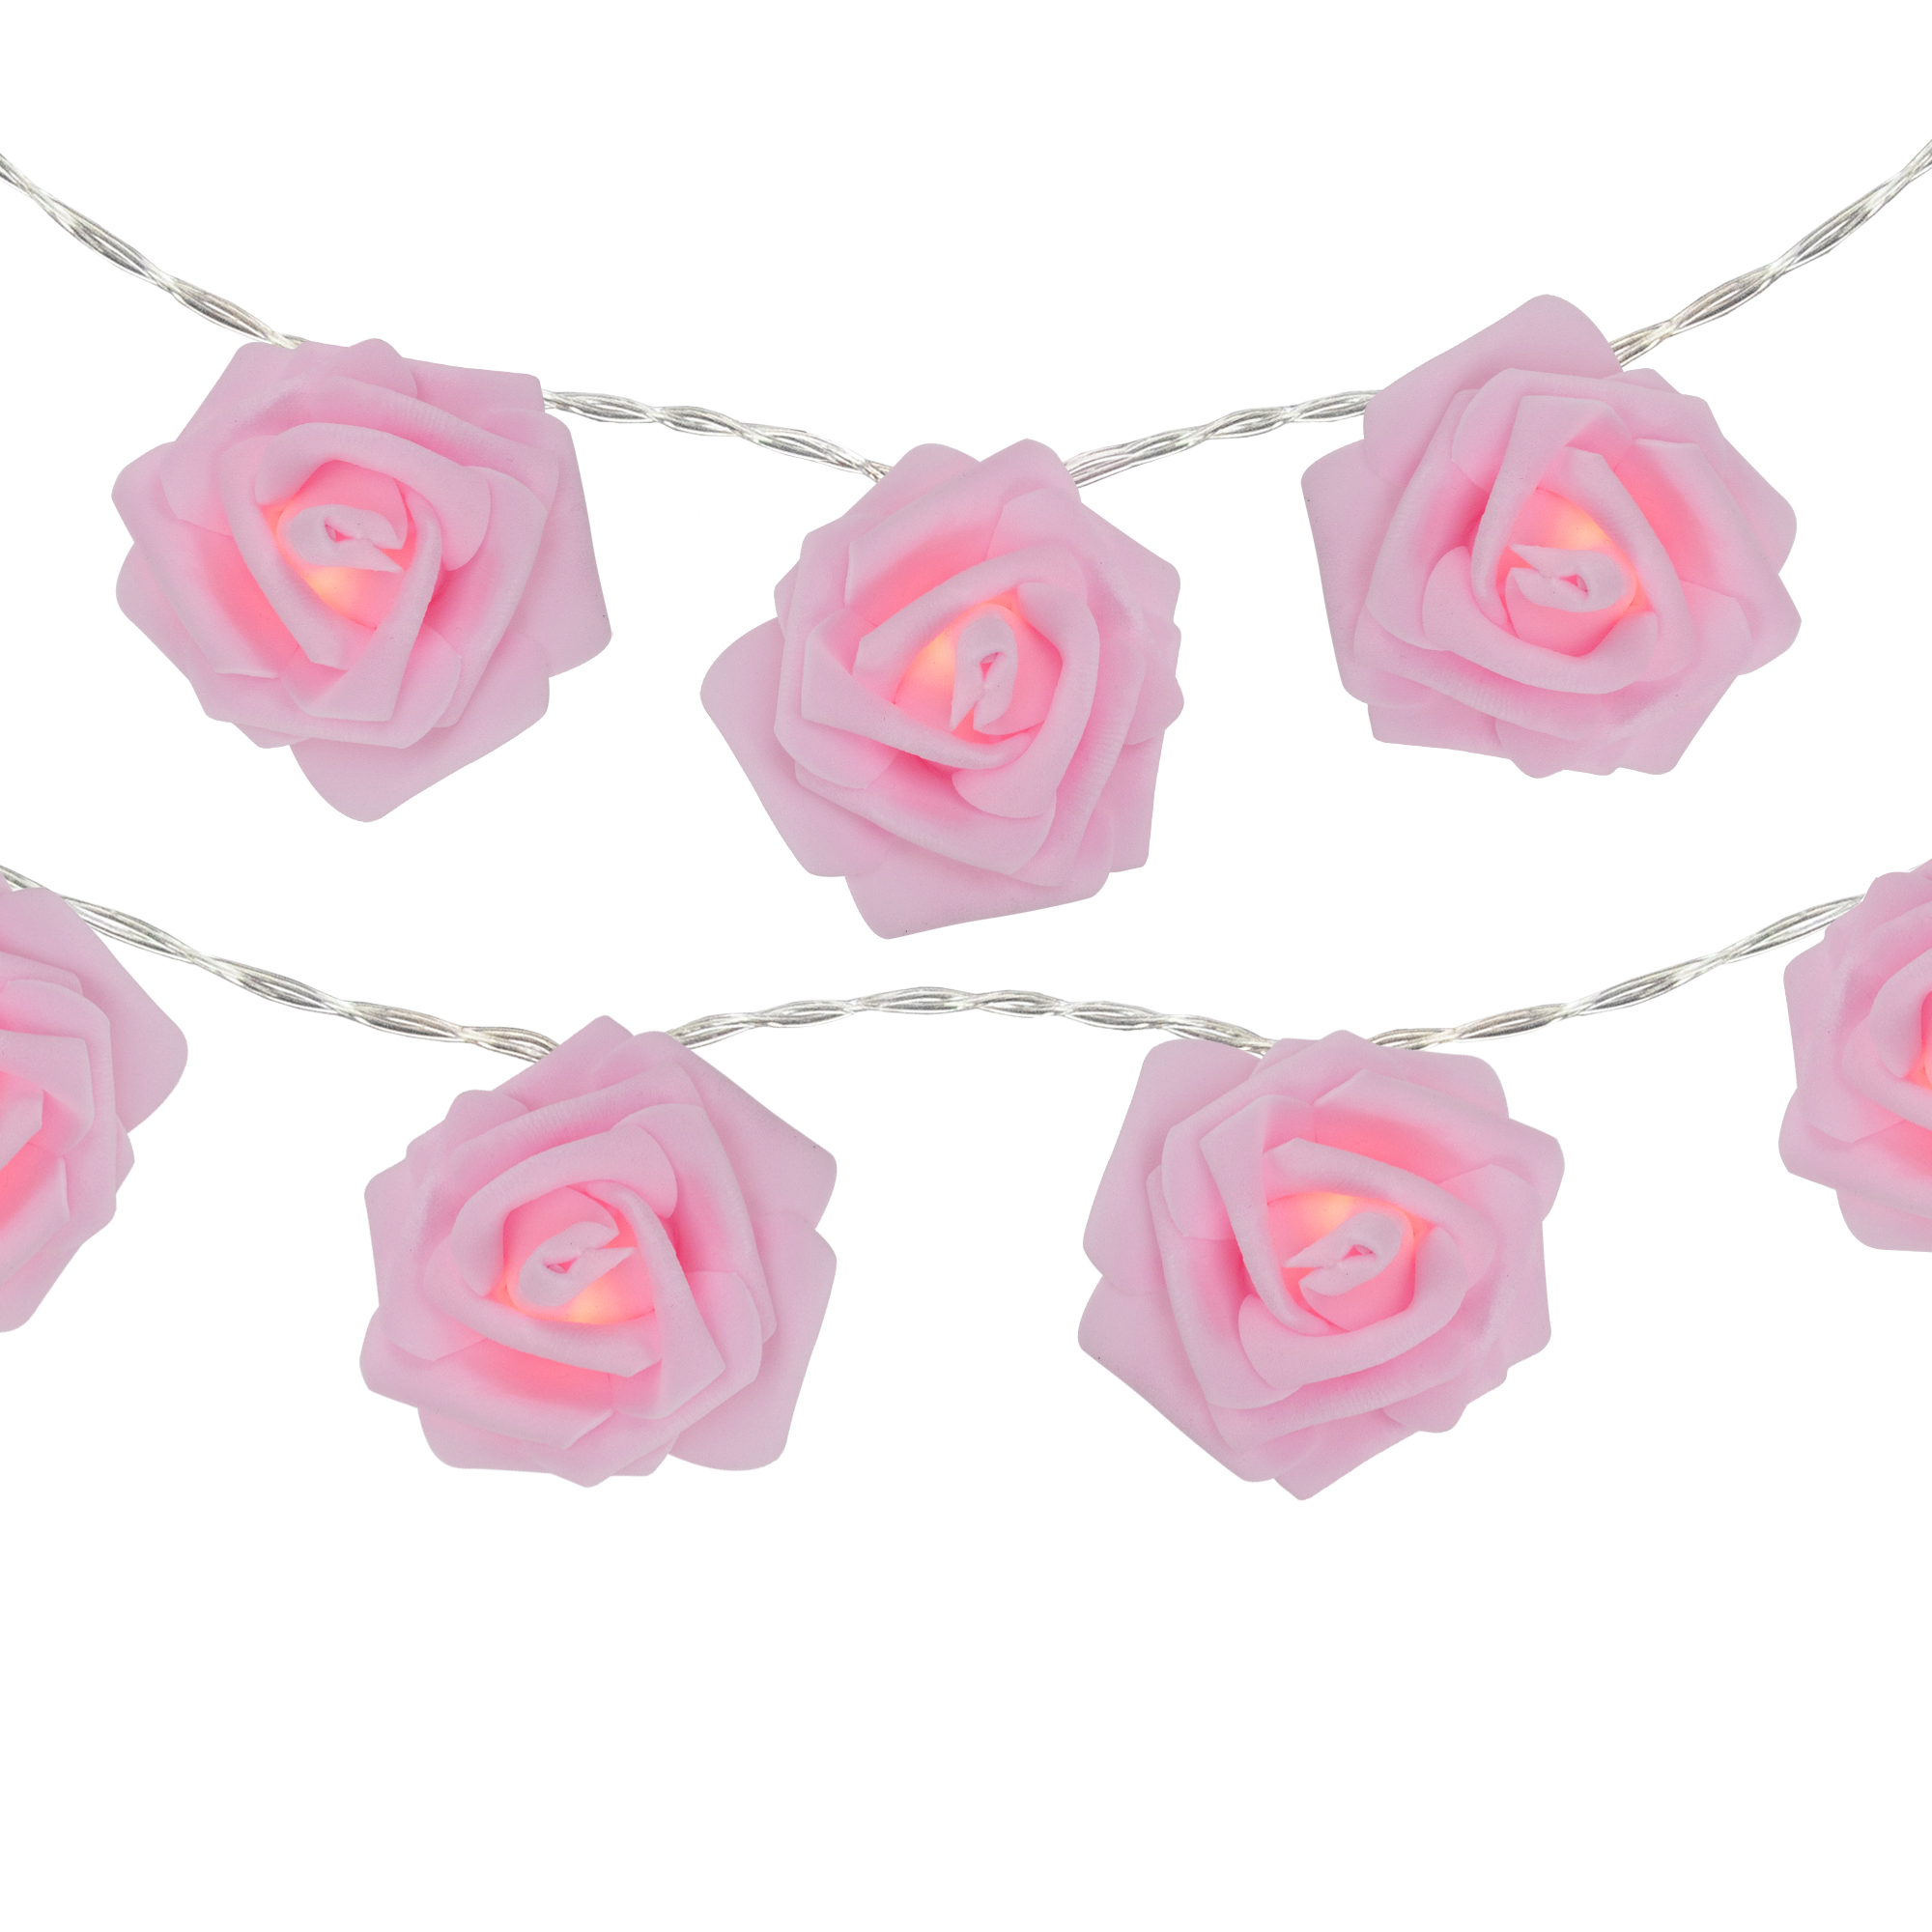 Northlight 10-Count Pink Rose Flower LED String Lights, 4.5ft, Clear Wire